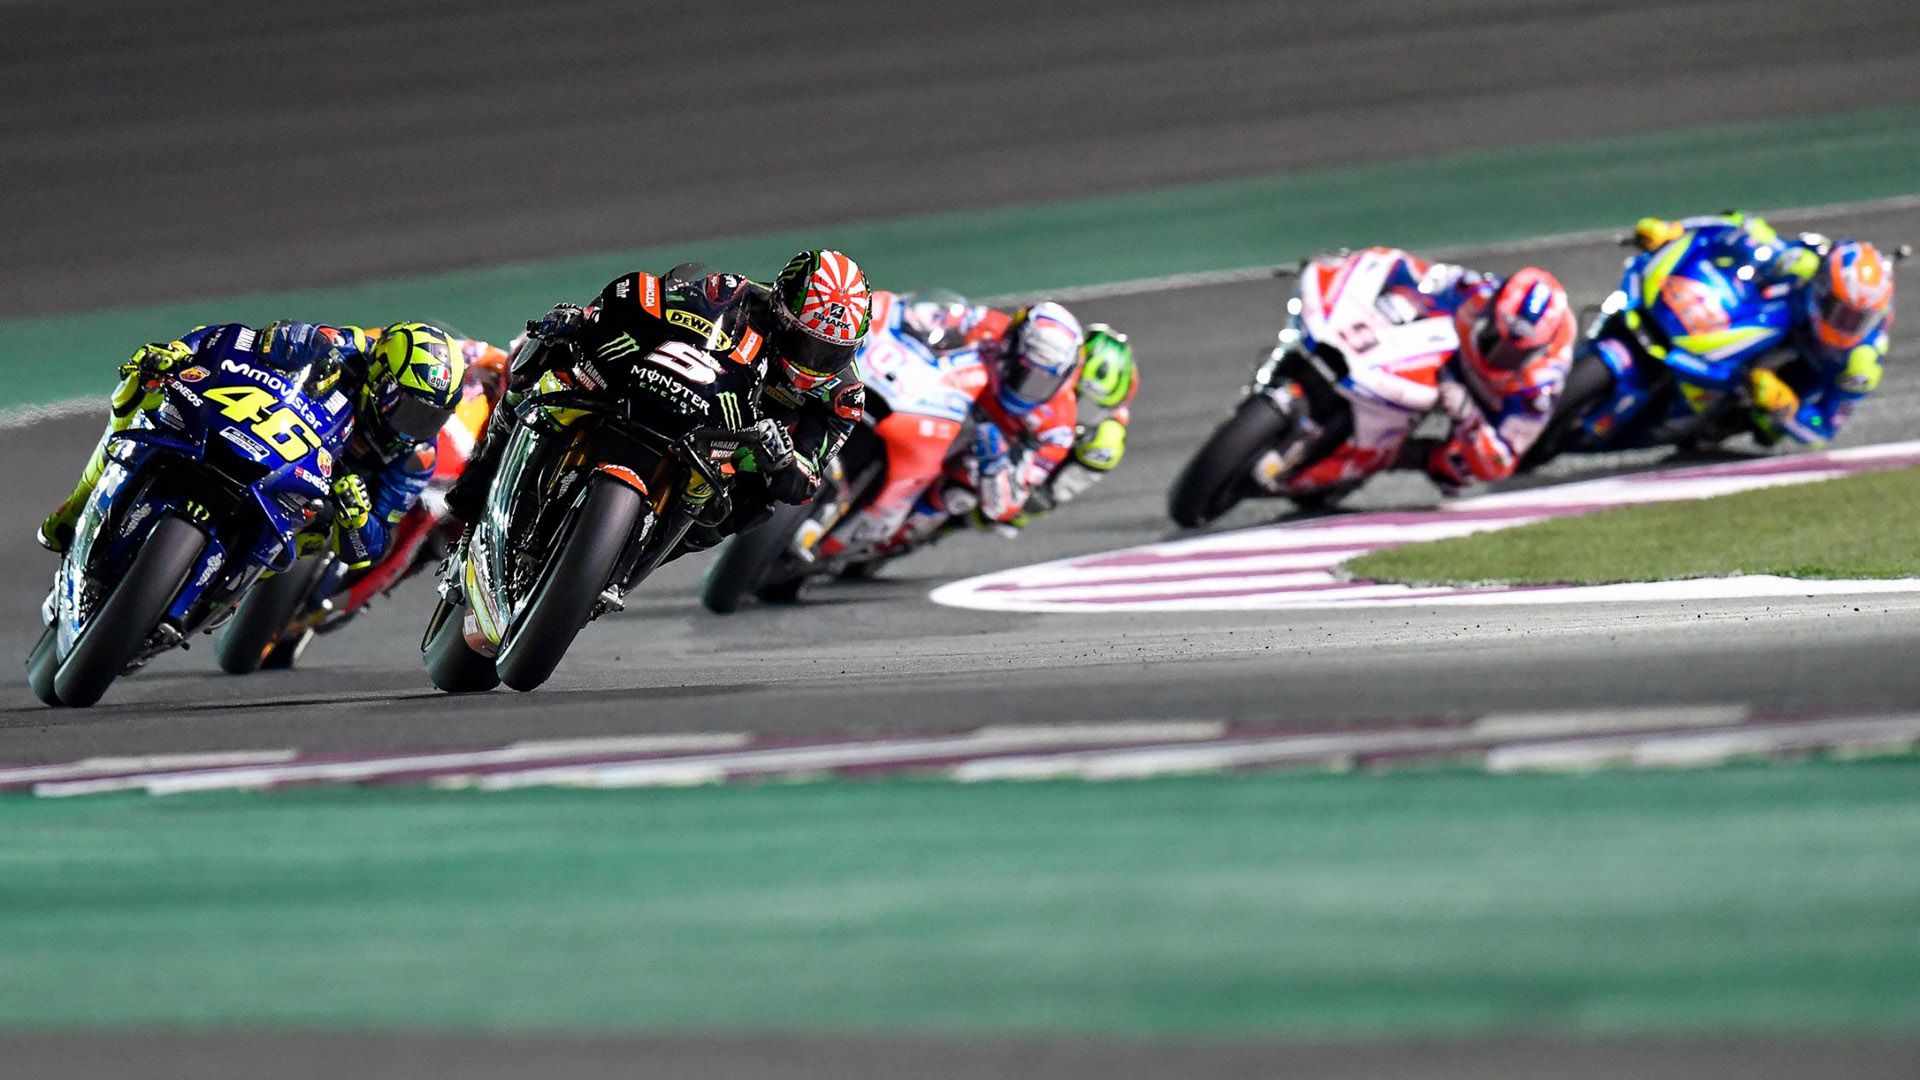 Qatar MotoGP Results and Coverage Fast Facts